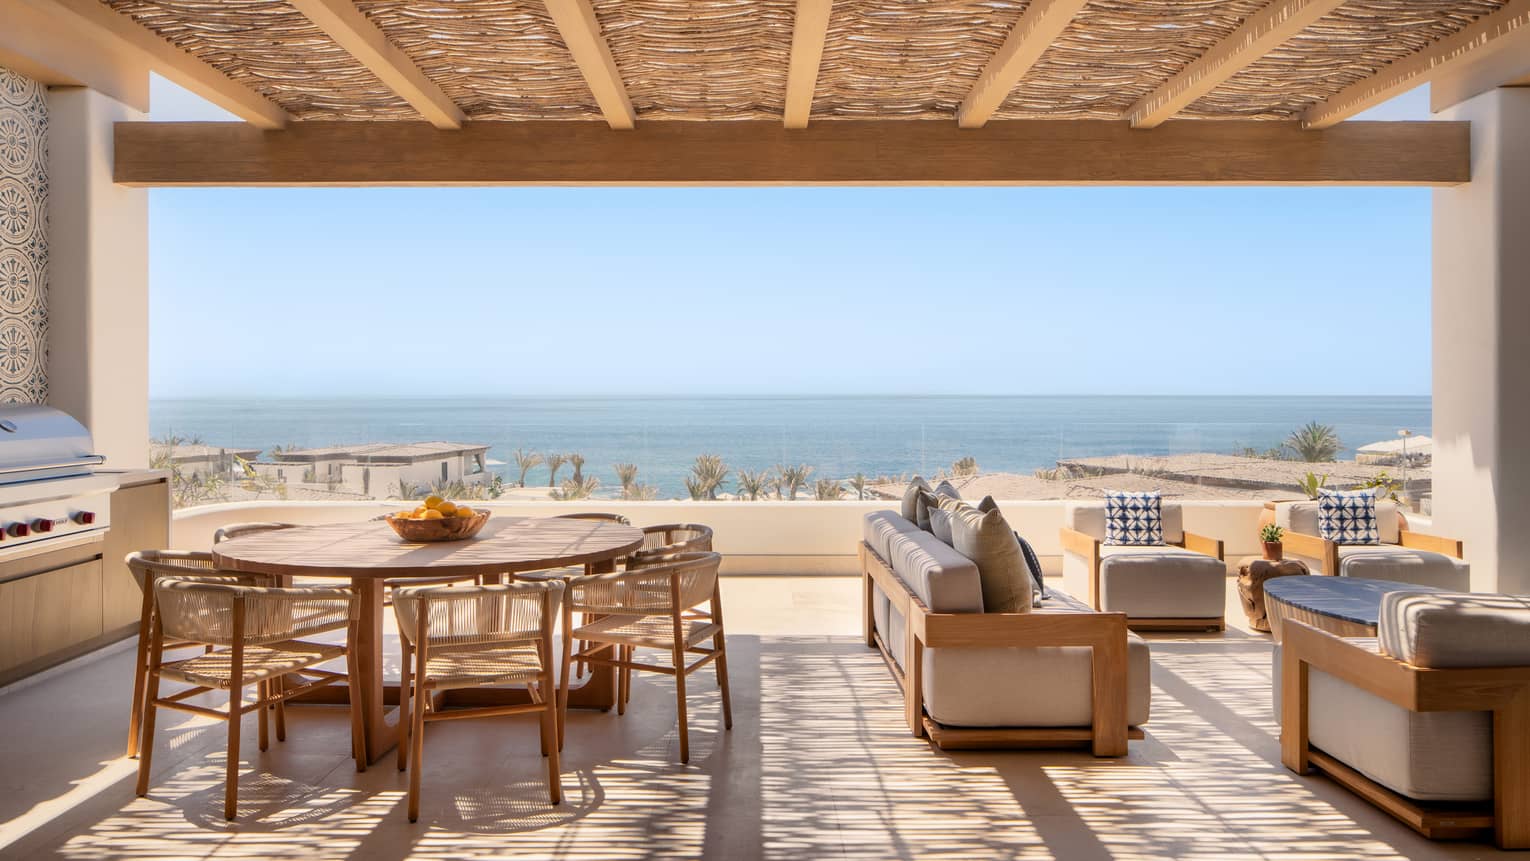 Covered terrace with lounge seating and a large round dining table and a view of the ocean from a luxury private villa at Four Seasons Resort and Residences Cabo San Lucas